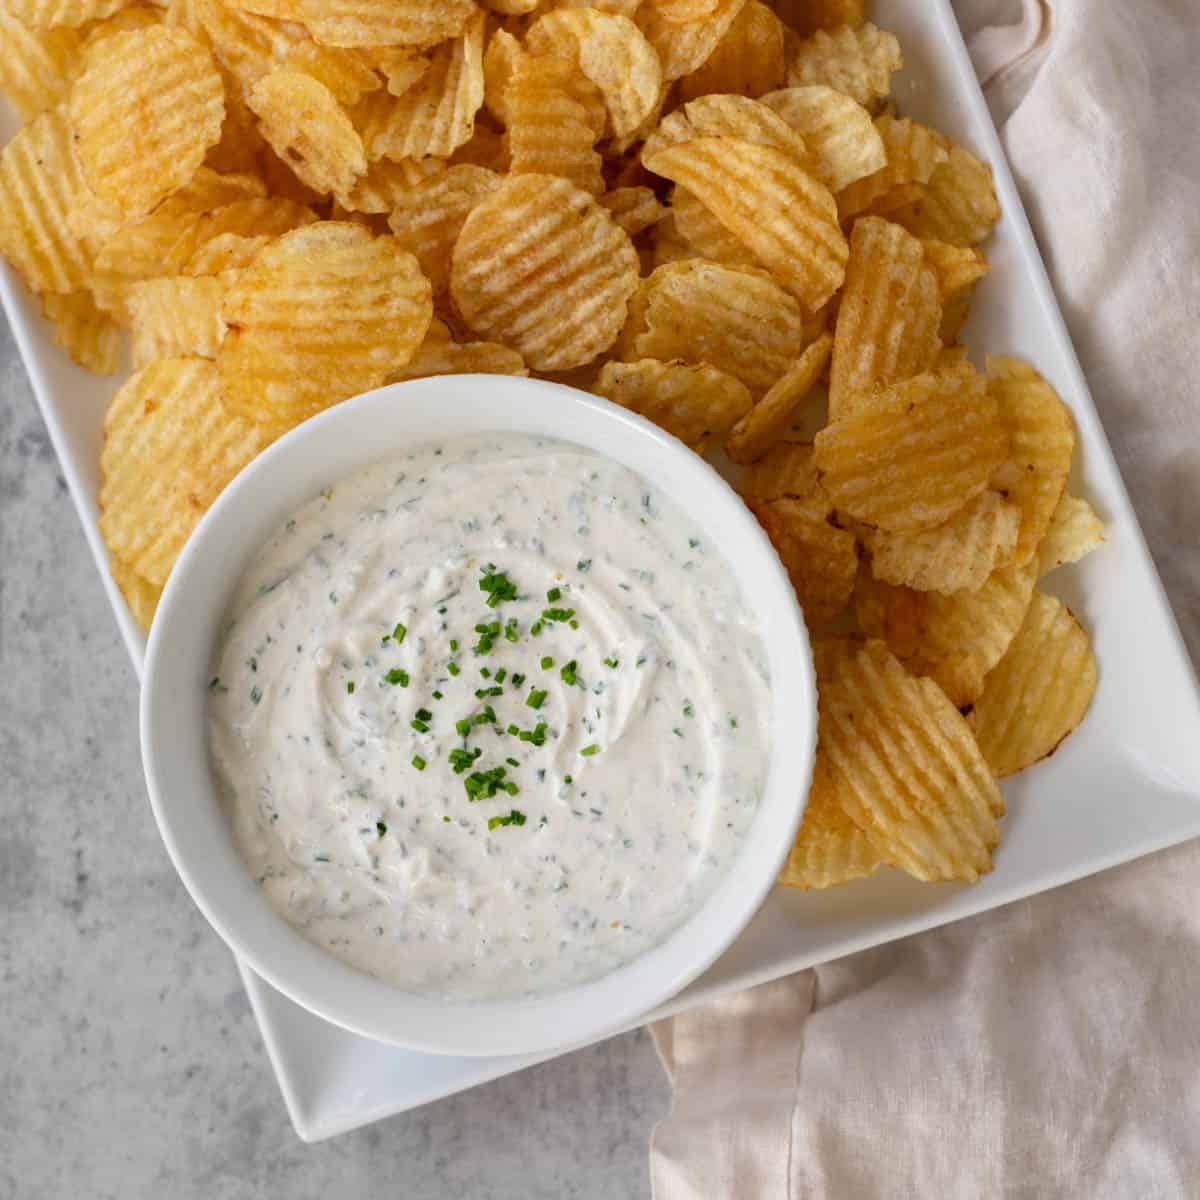 sour cream and chive dip in a white bowl on a rectangular platter filled with potato chips